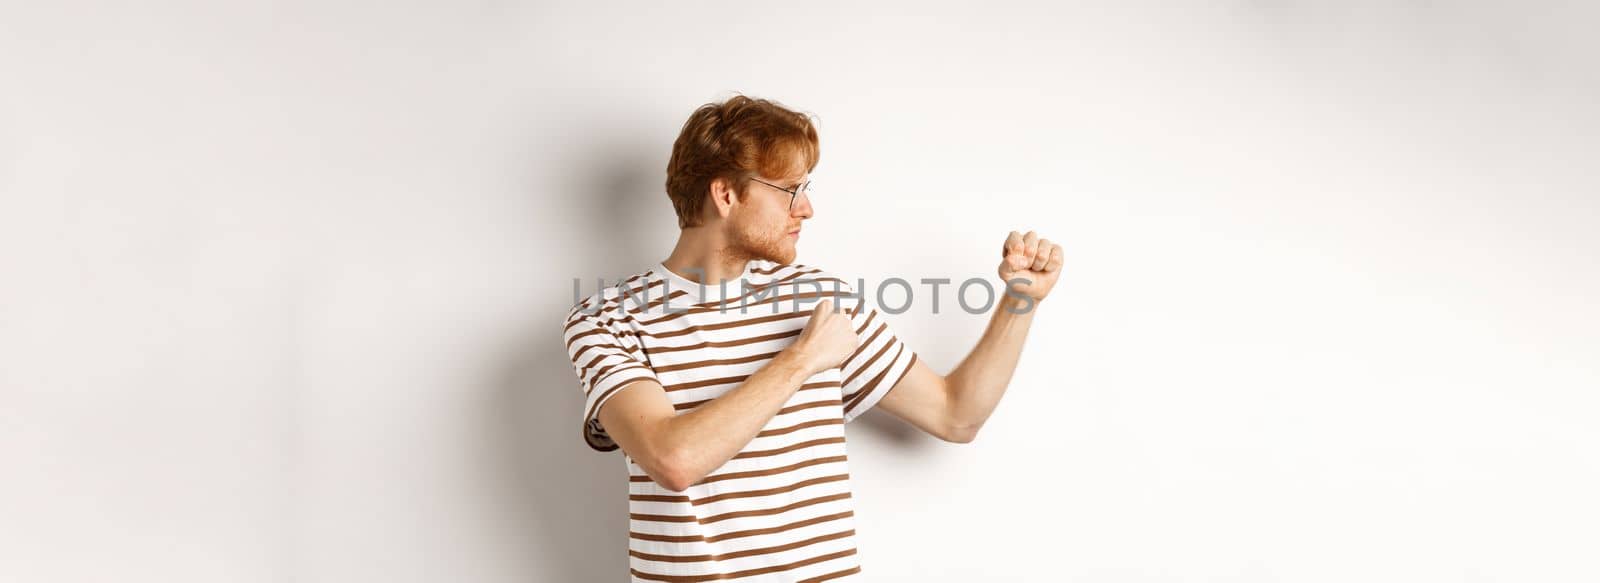 Funny young man with red hair raising fists for fight, shadow boxing and looking serious at left side, standing over white background.